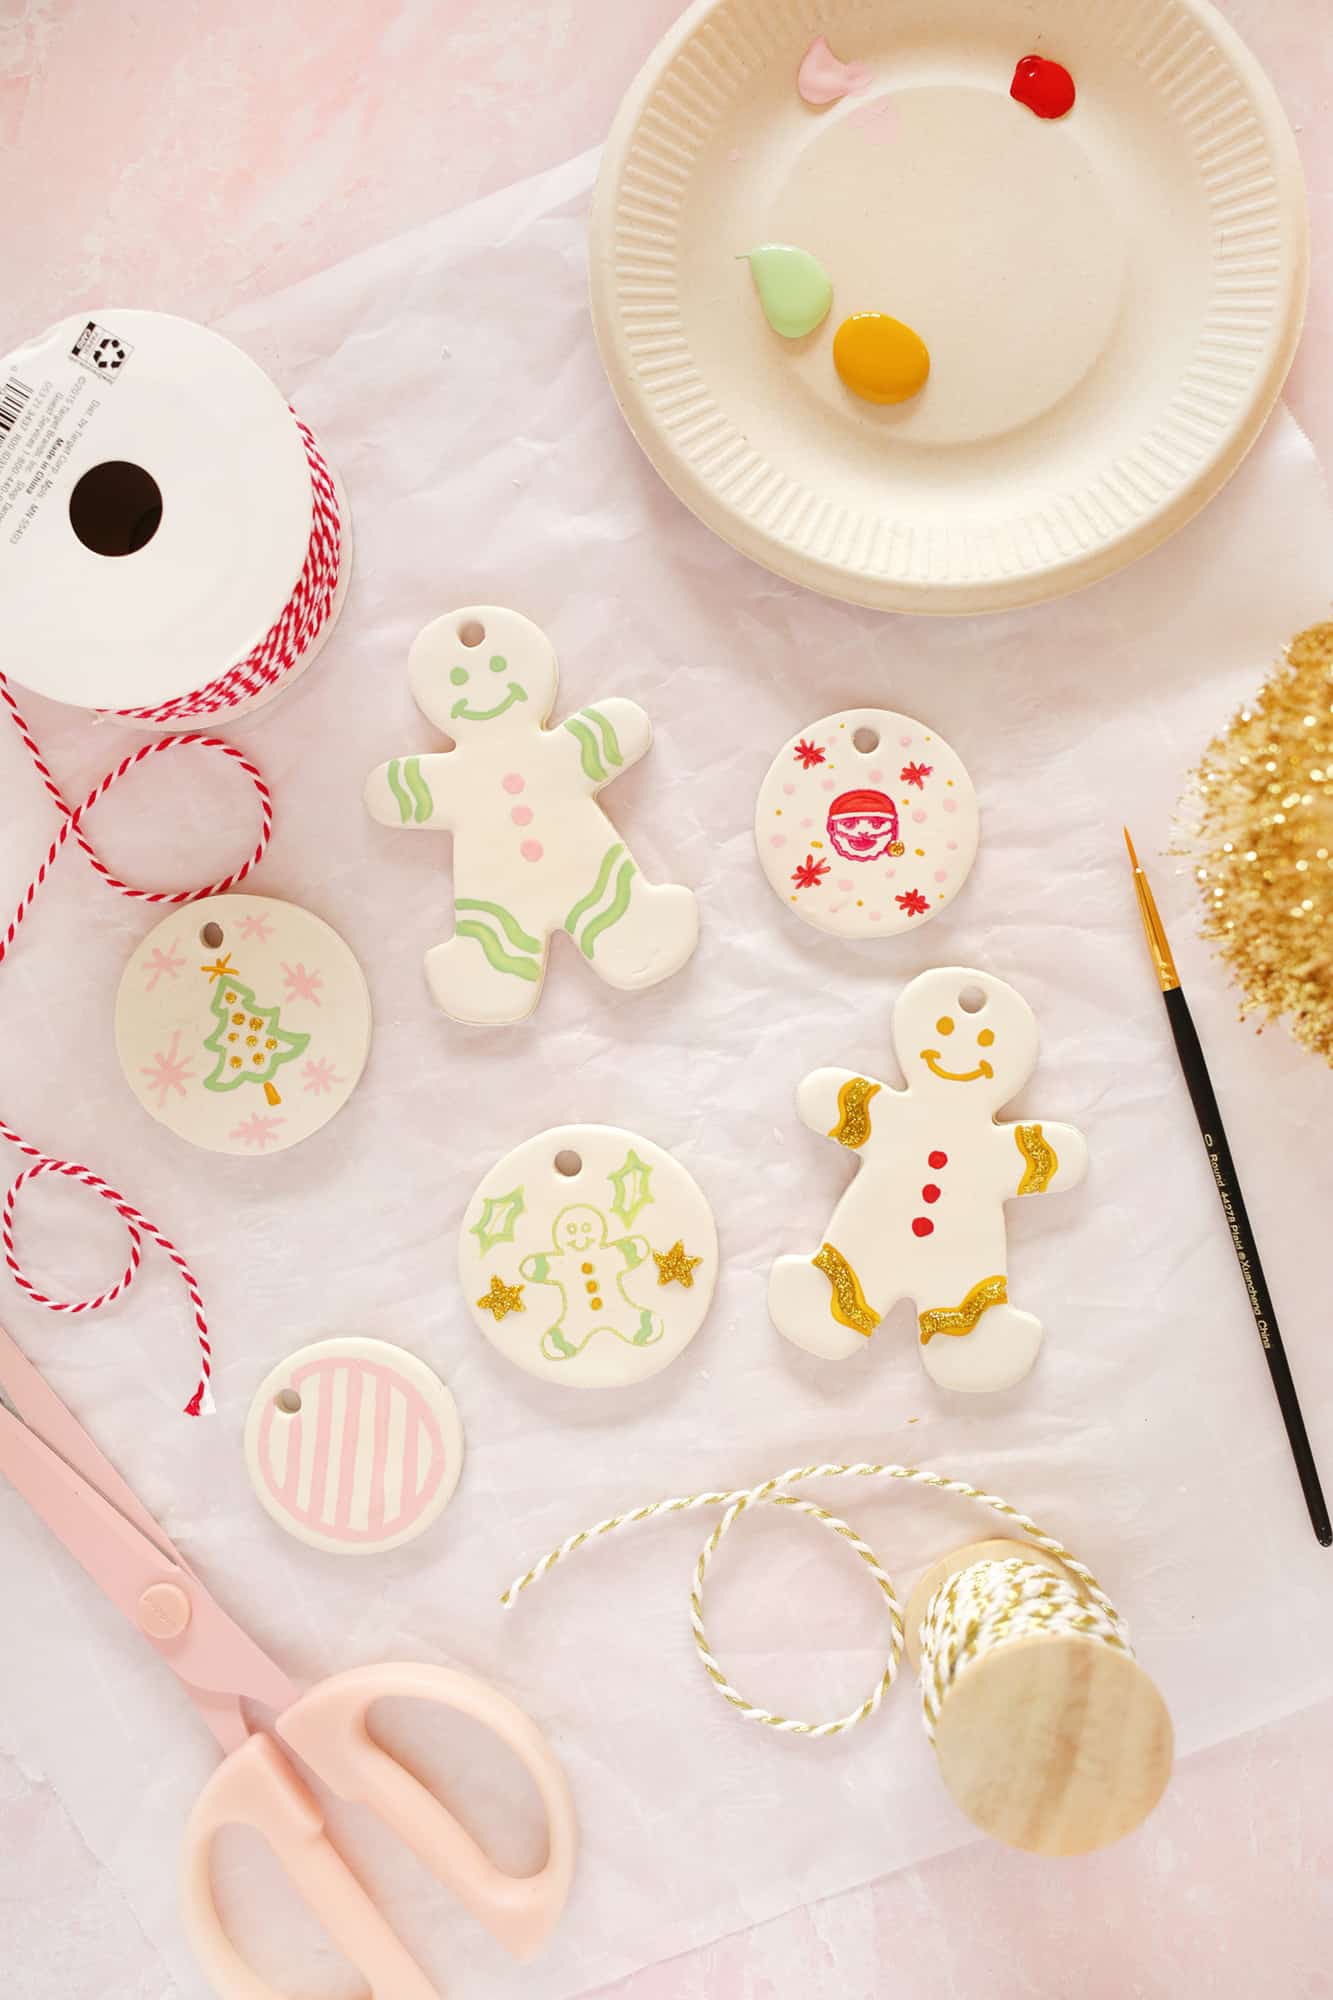 painted gingerbread people and clay circular ornaments 